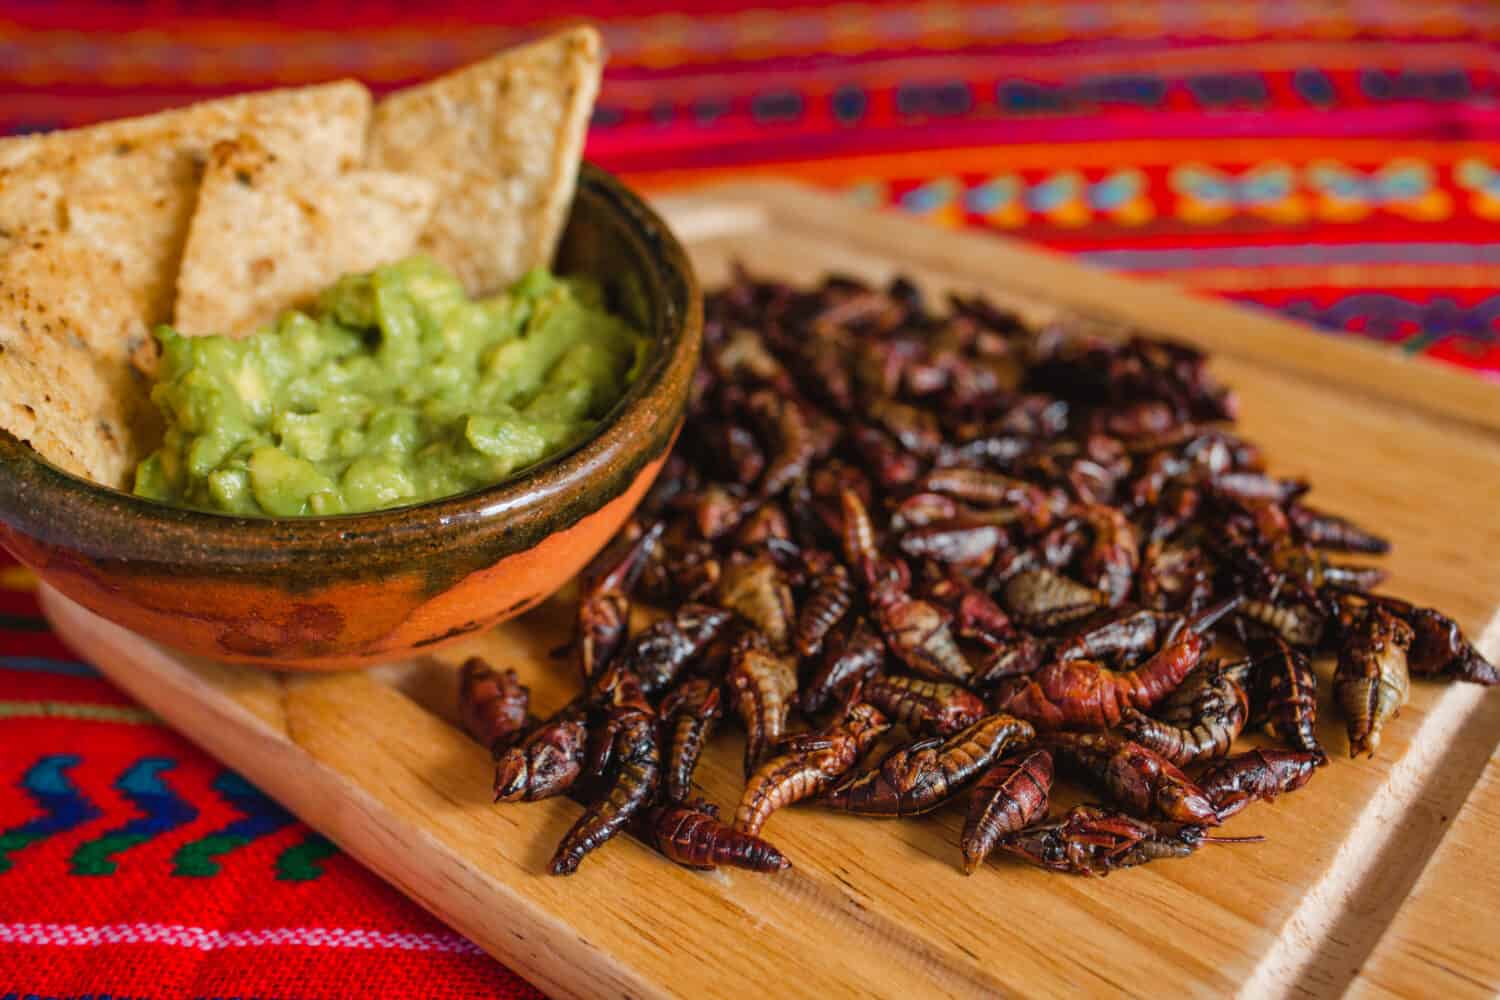 Chapulines, grasshoppers and guacamole snack traditional Mexican cuisine from Oaxaca mexico